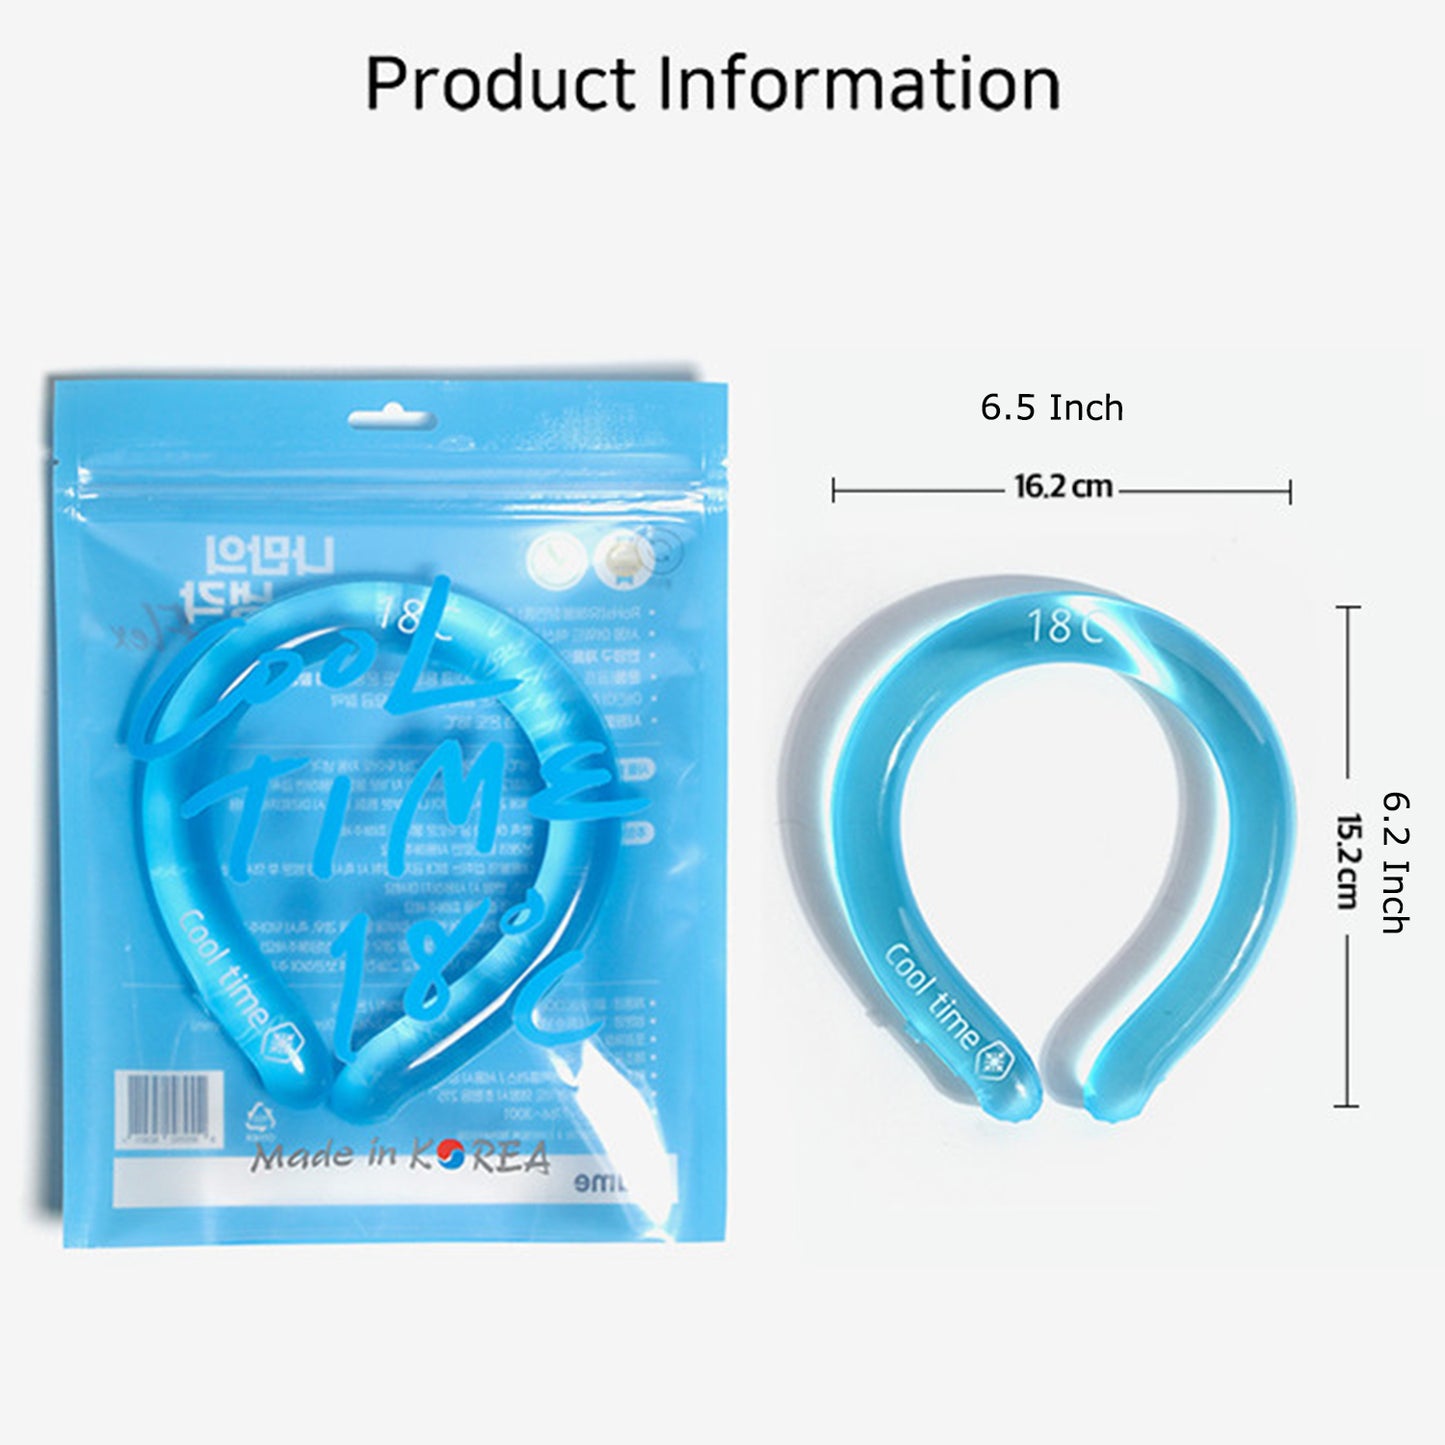 Cooltime Neck Cooling Tube Cooler Wearable Cooling Neck Wraps for Summer Heat, Hands Free Cold Pack Reusable Neck Ice Neckless Type Neck band Cooler